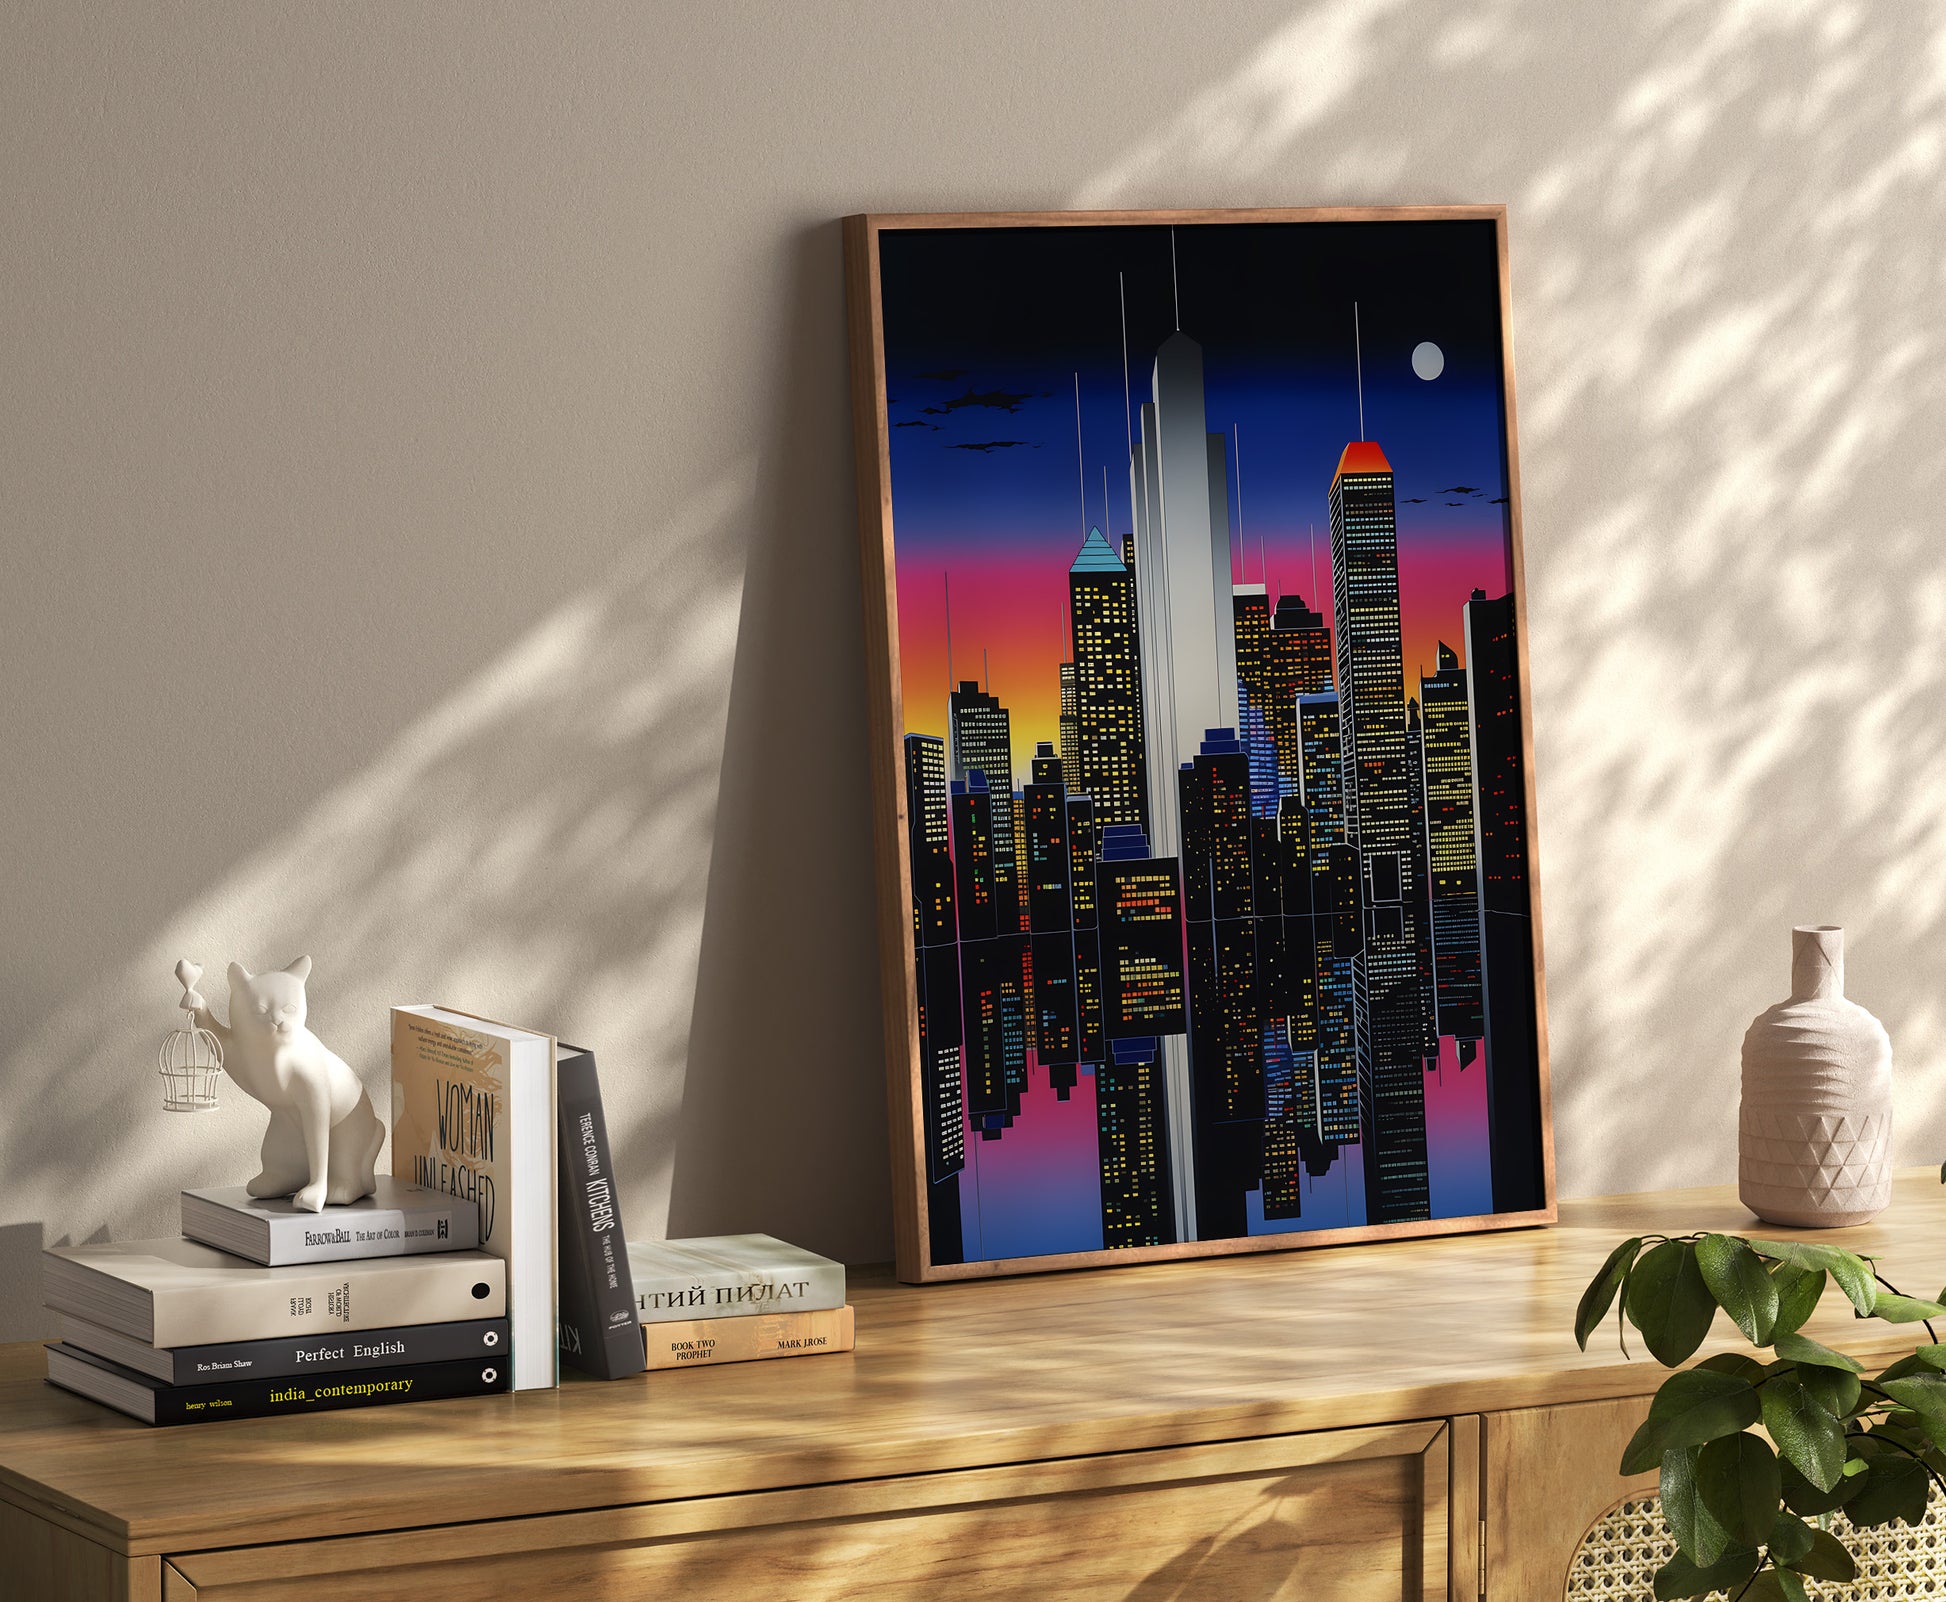 Canvas art of a cityscape at twilight on a shelf with books and decor.